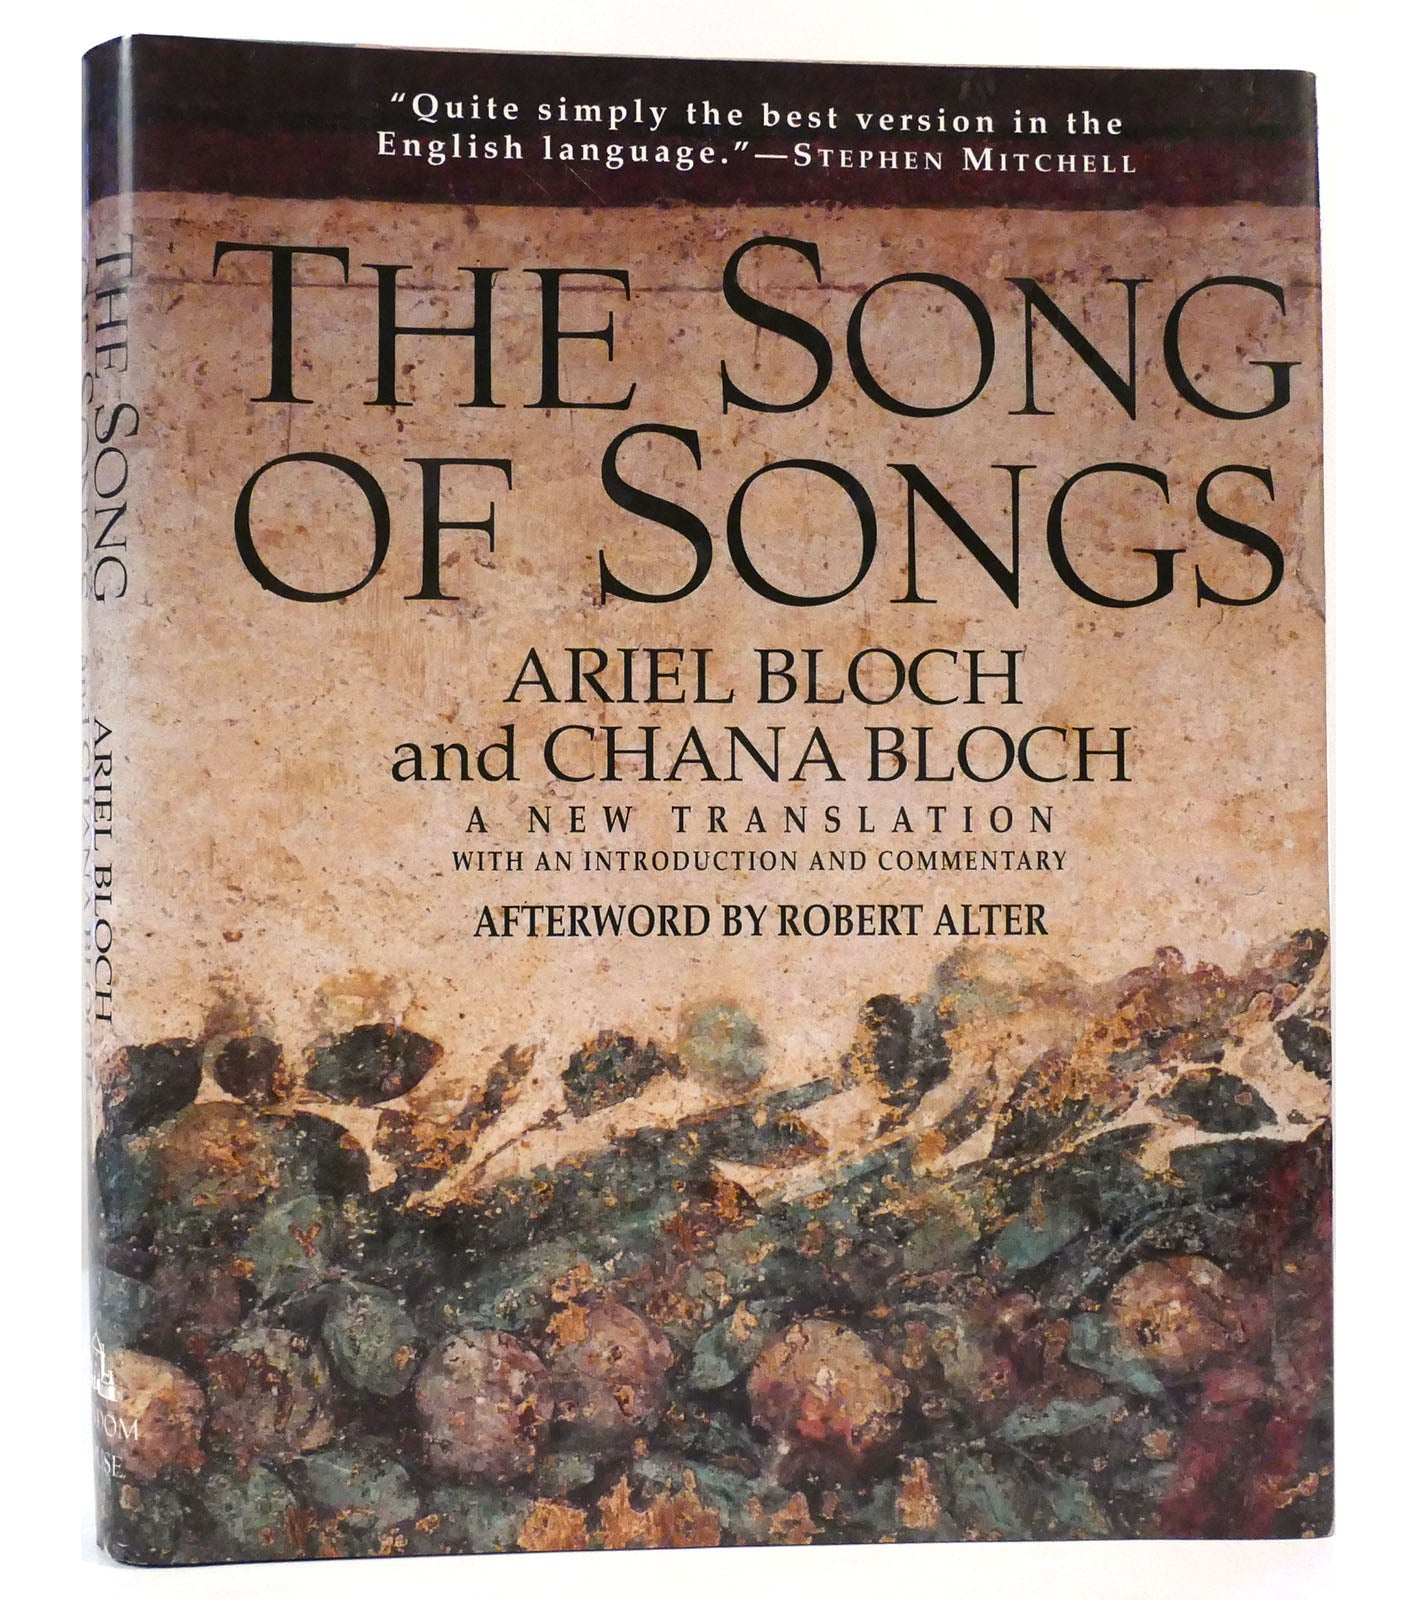 The　Bloch　Bloch,　First　THE　Ariel　Edition;　Poem　First　First　SONGS　SONG　Chana　Love　Great　World's　OF　Printing